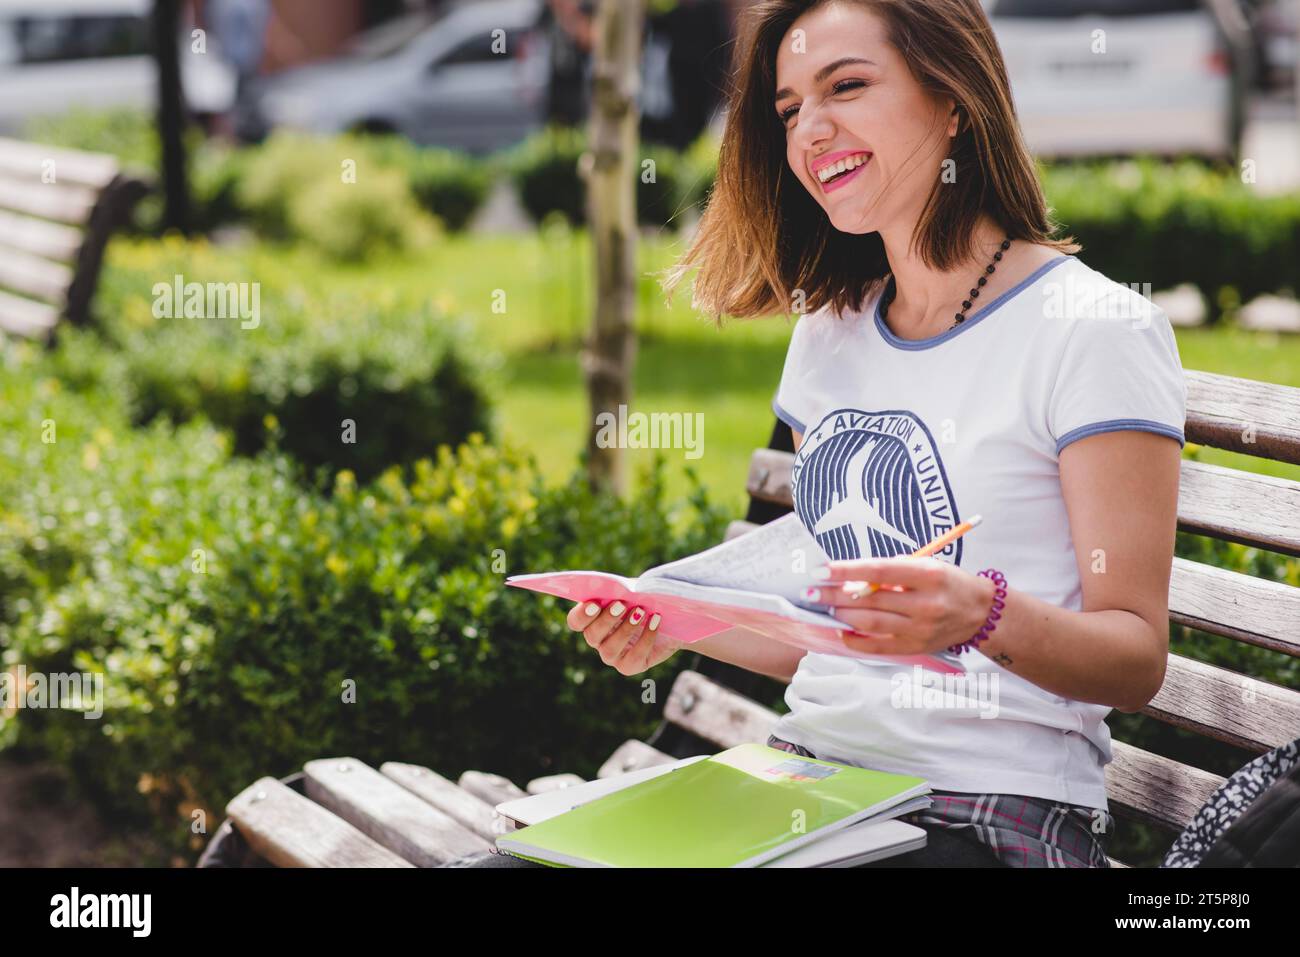 Girl sitting bench holding notebook smiling Stock Photo